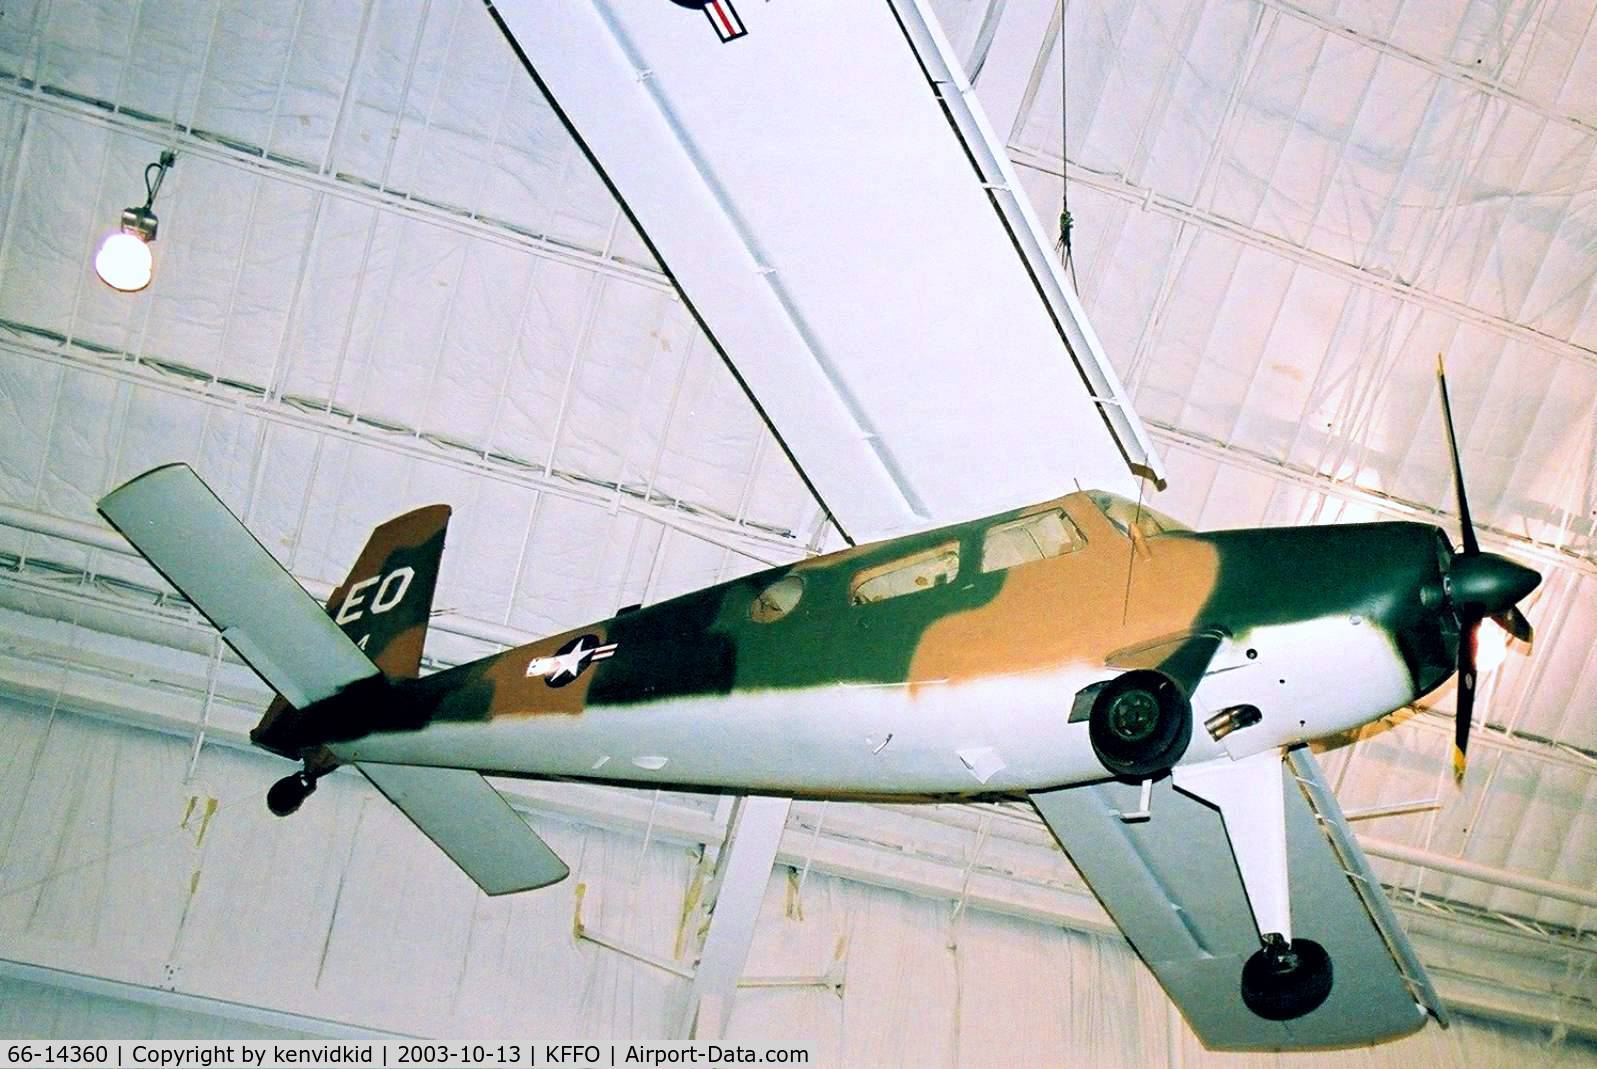 66-14360, 1967 Helio HT-295/U-10D Super Courier C/N 1262, At the Museum of the United States Air Force Dayton Ohio.